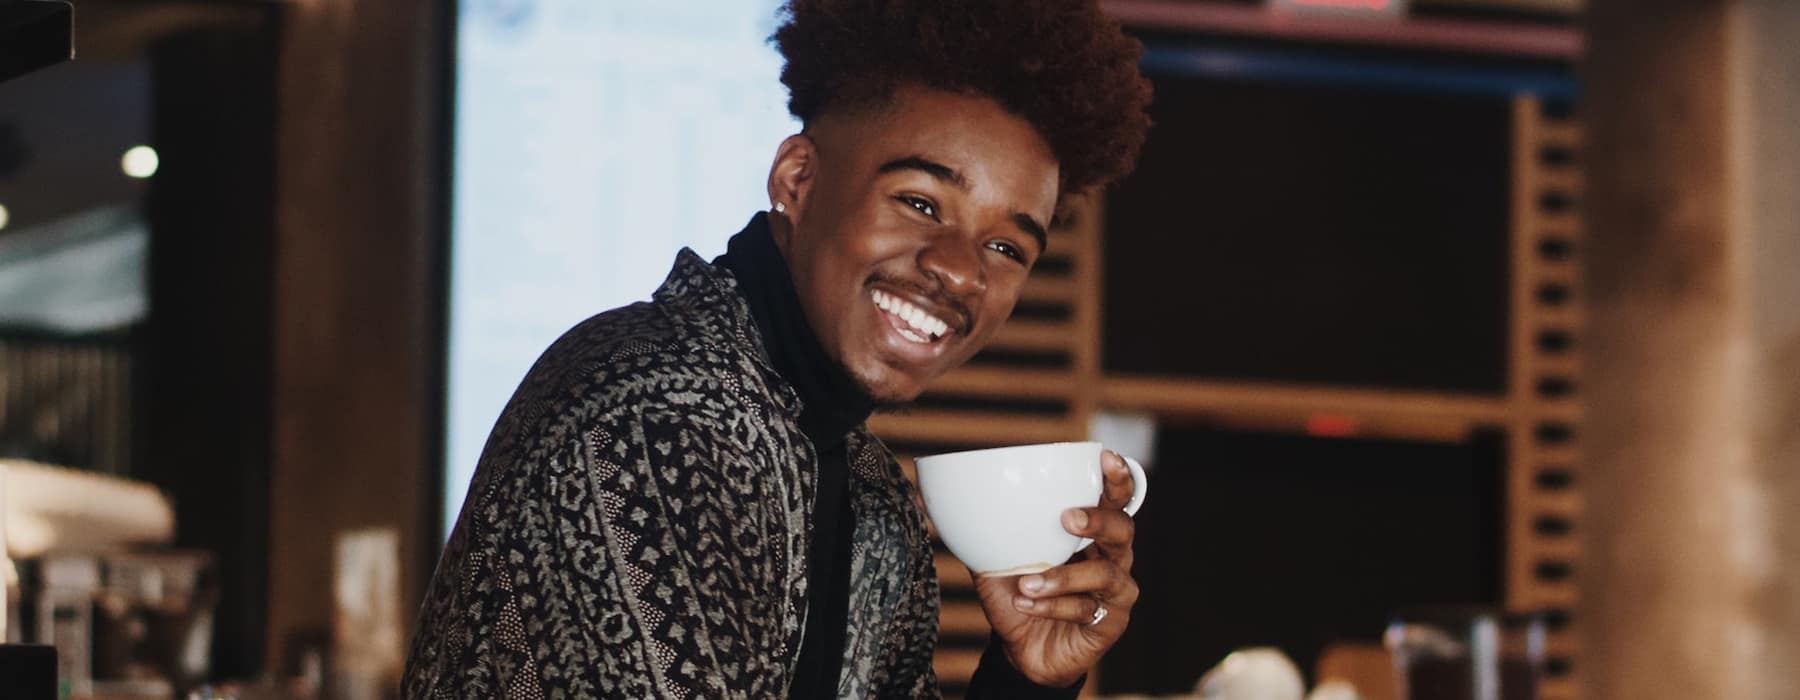 lifestyle image of a young man at a coffee shop